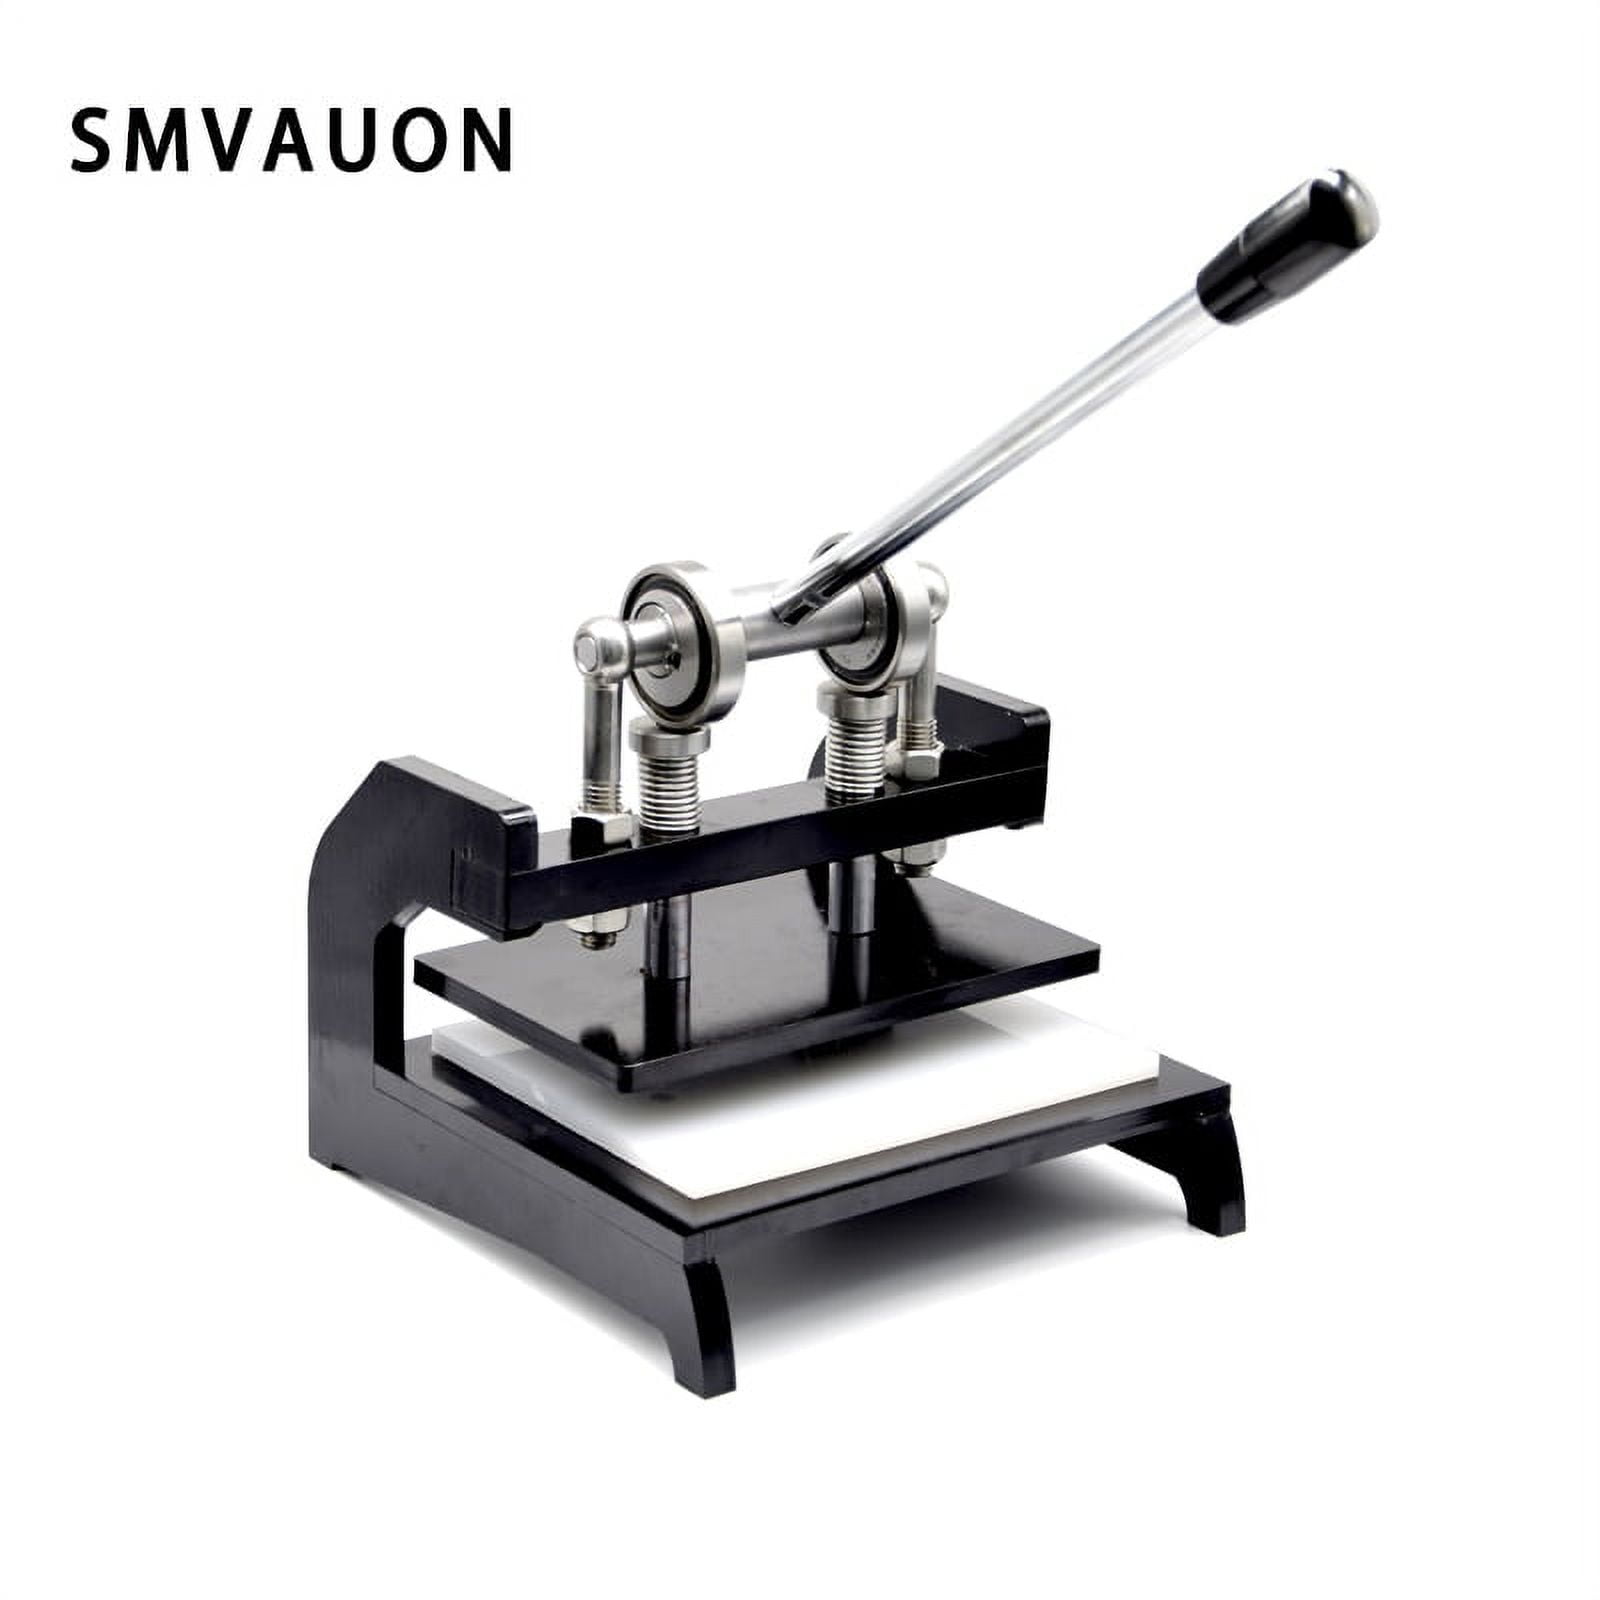 New Manual Pressure Machine Pro Leather Cutting Machine Die Cutter  Embossing Tools Hand Press Mold 255 X 160 MM Upper Platen 